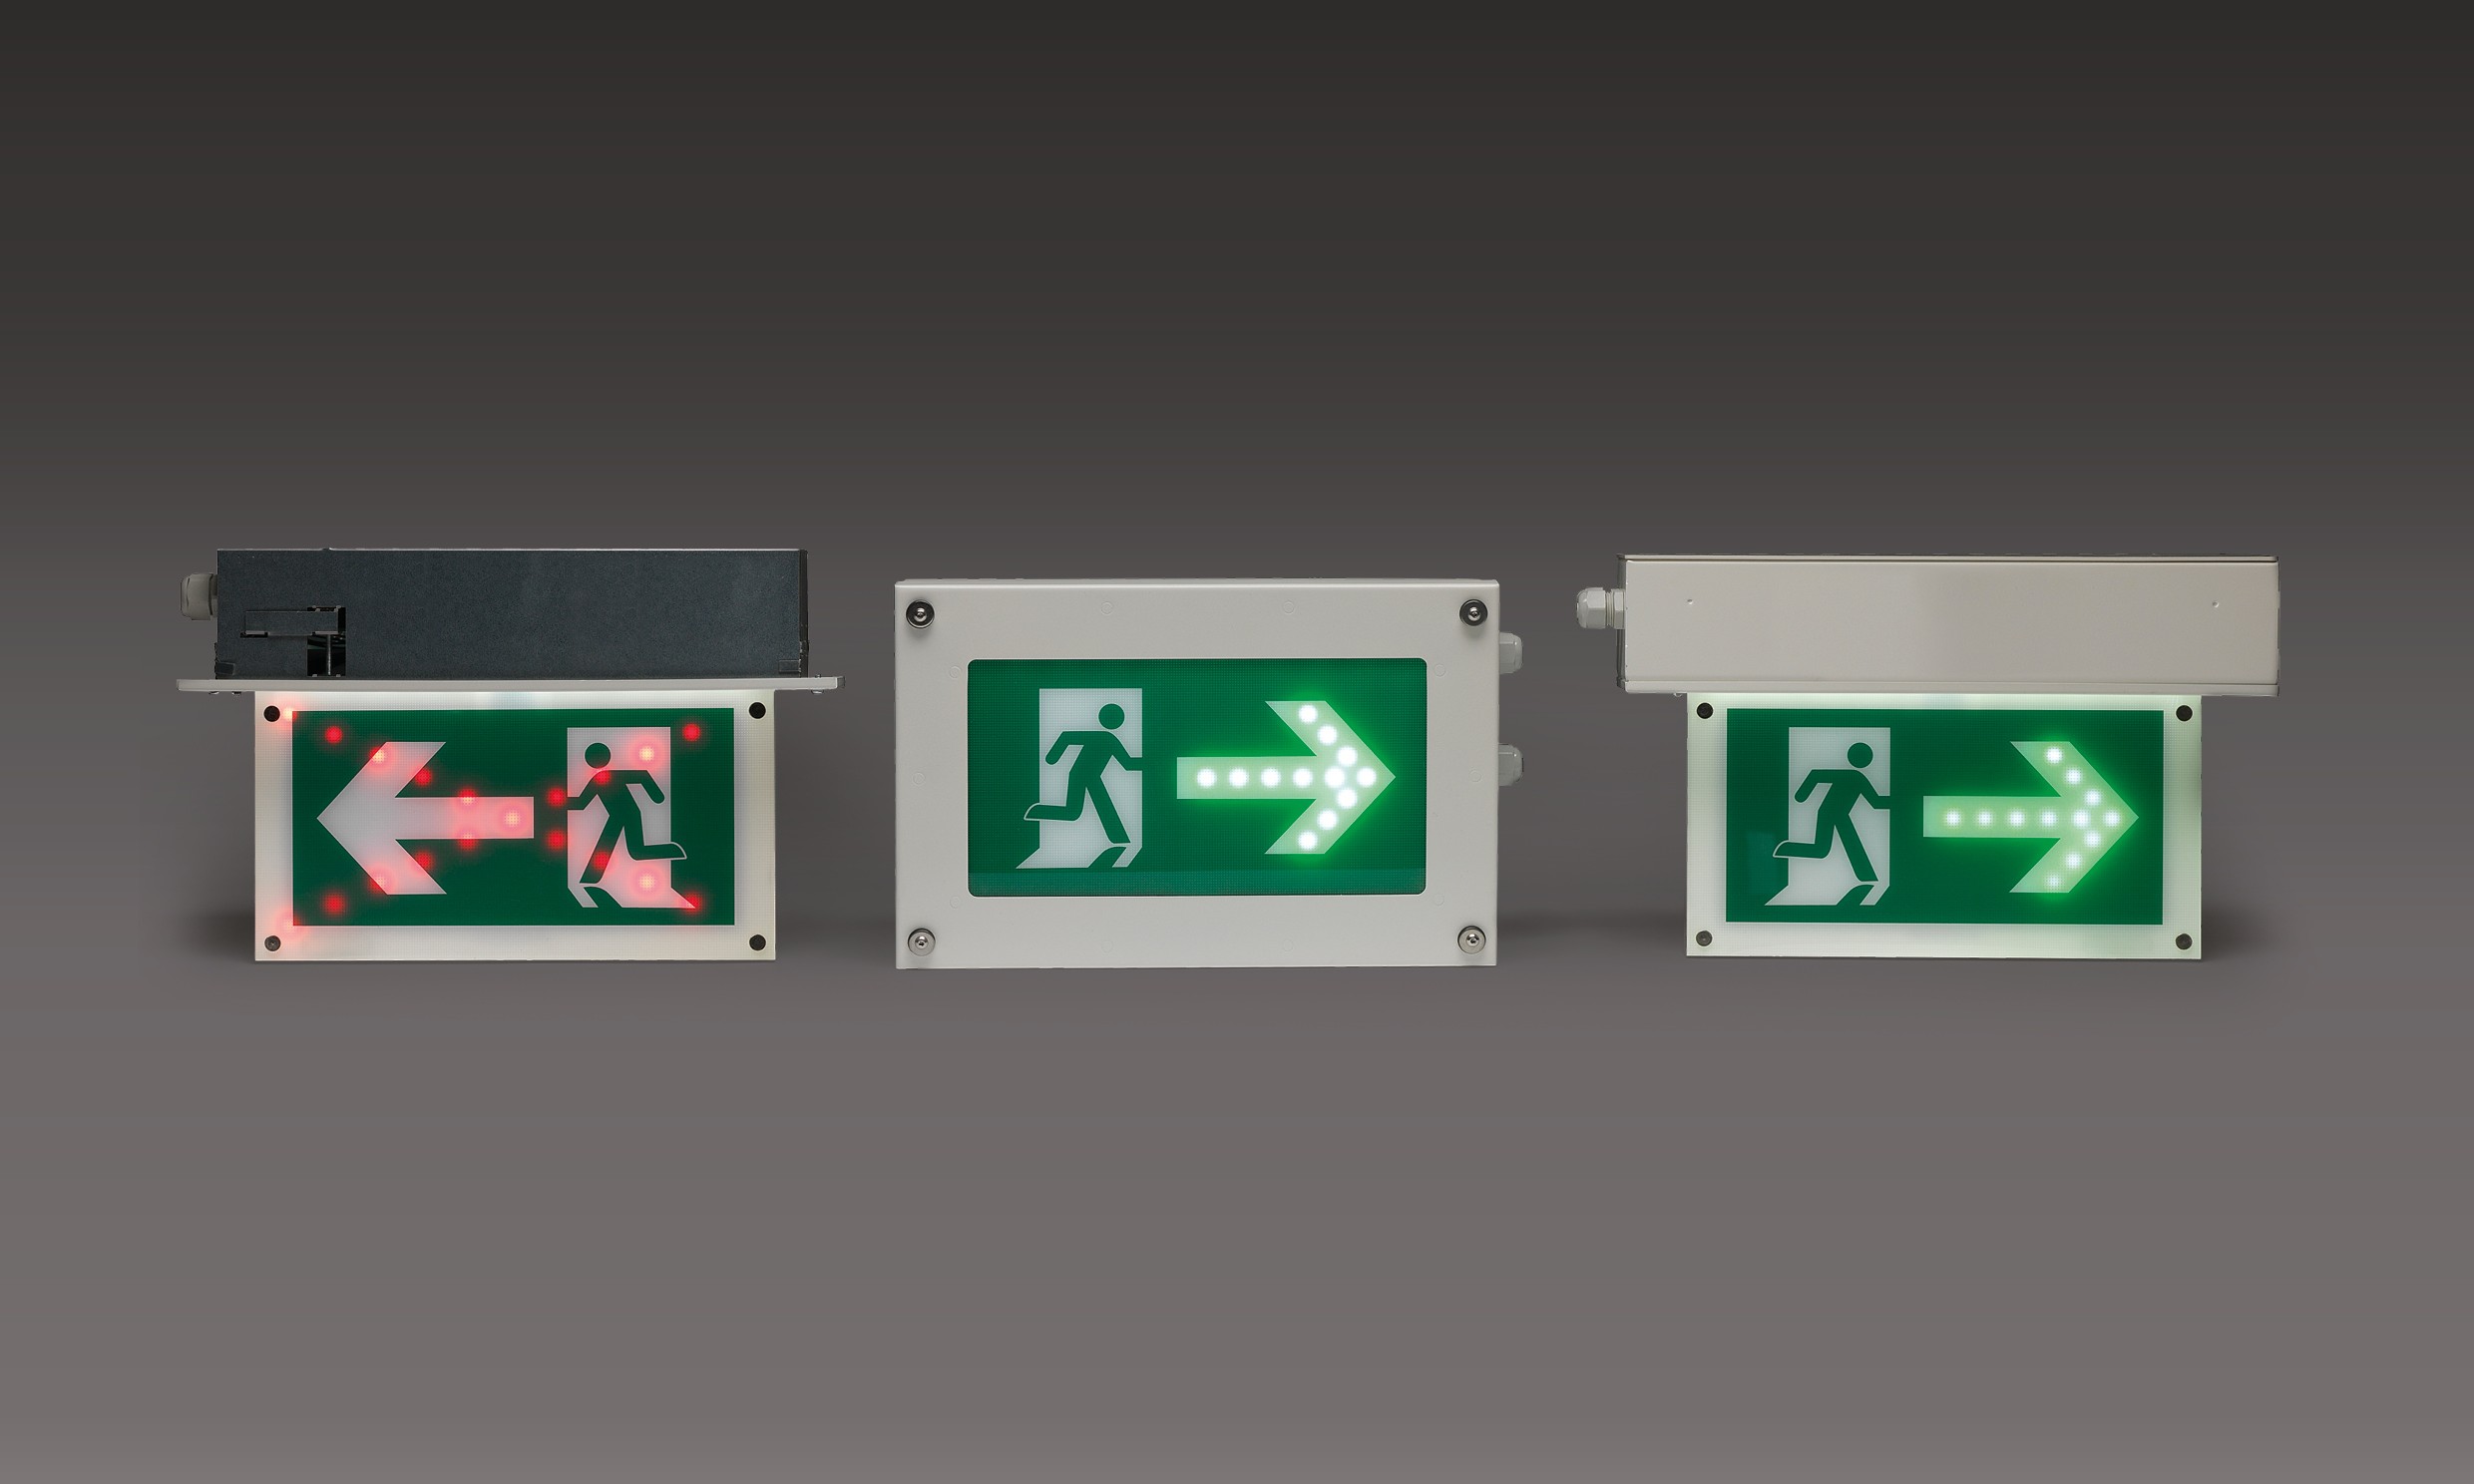 Faster, safer, building evacuations with advanced dynamic safety signage